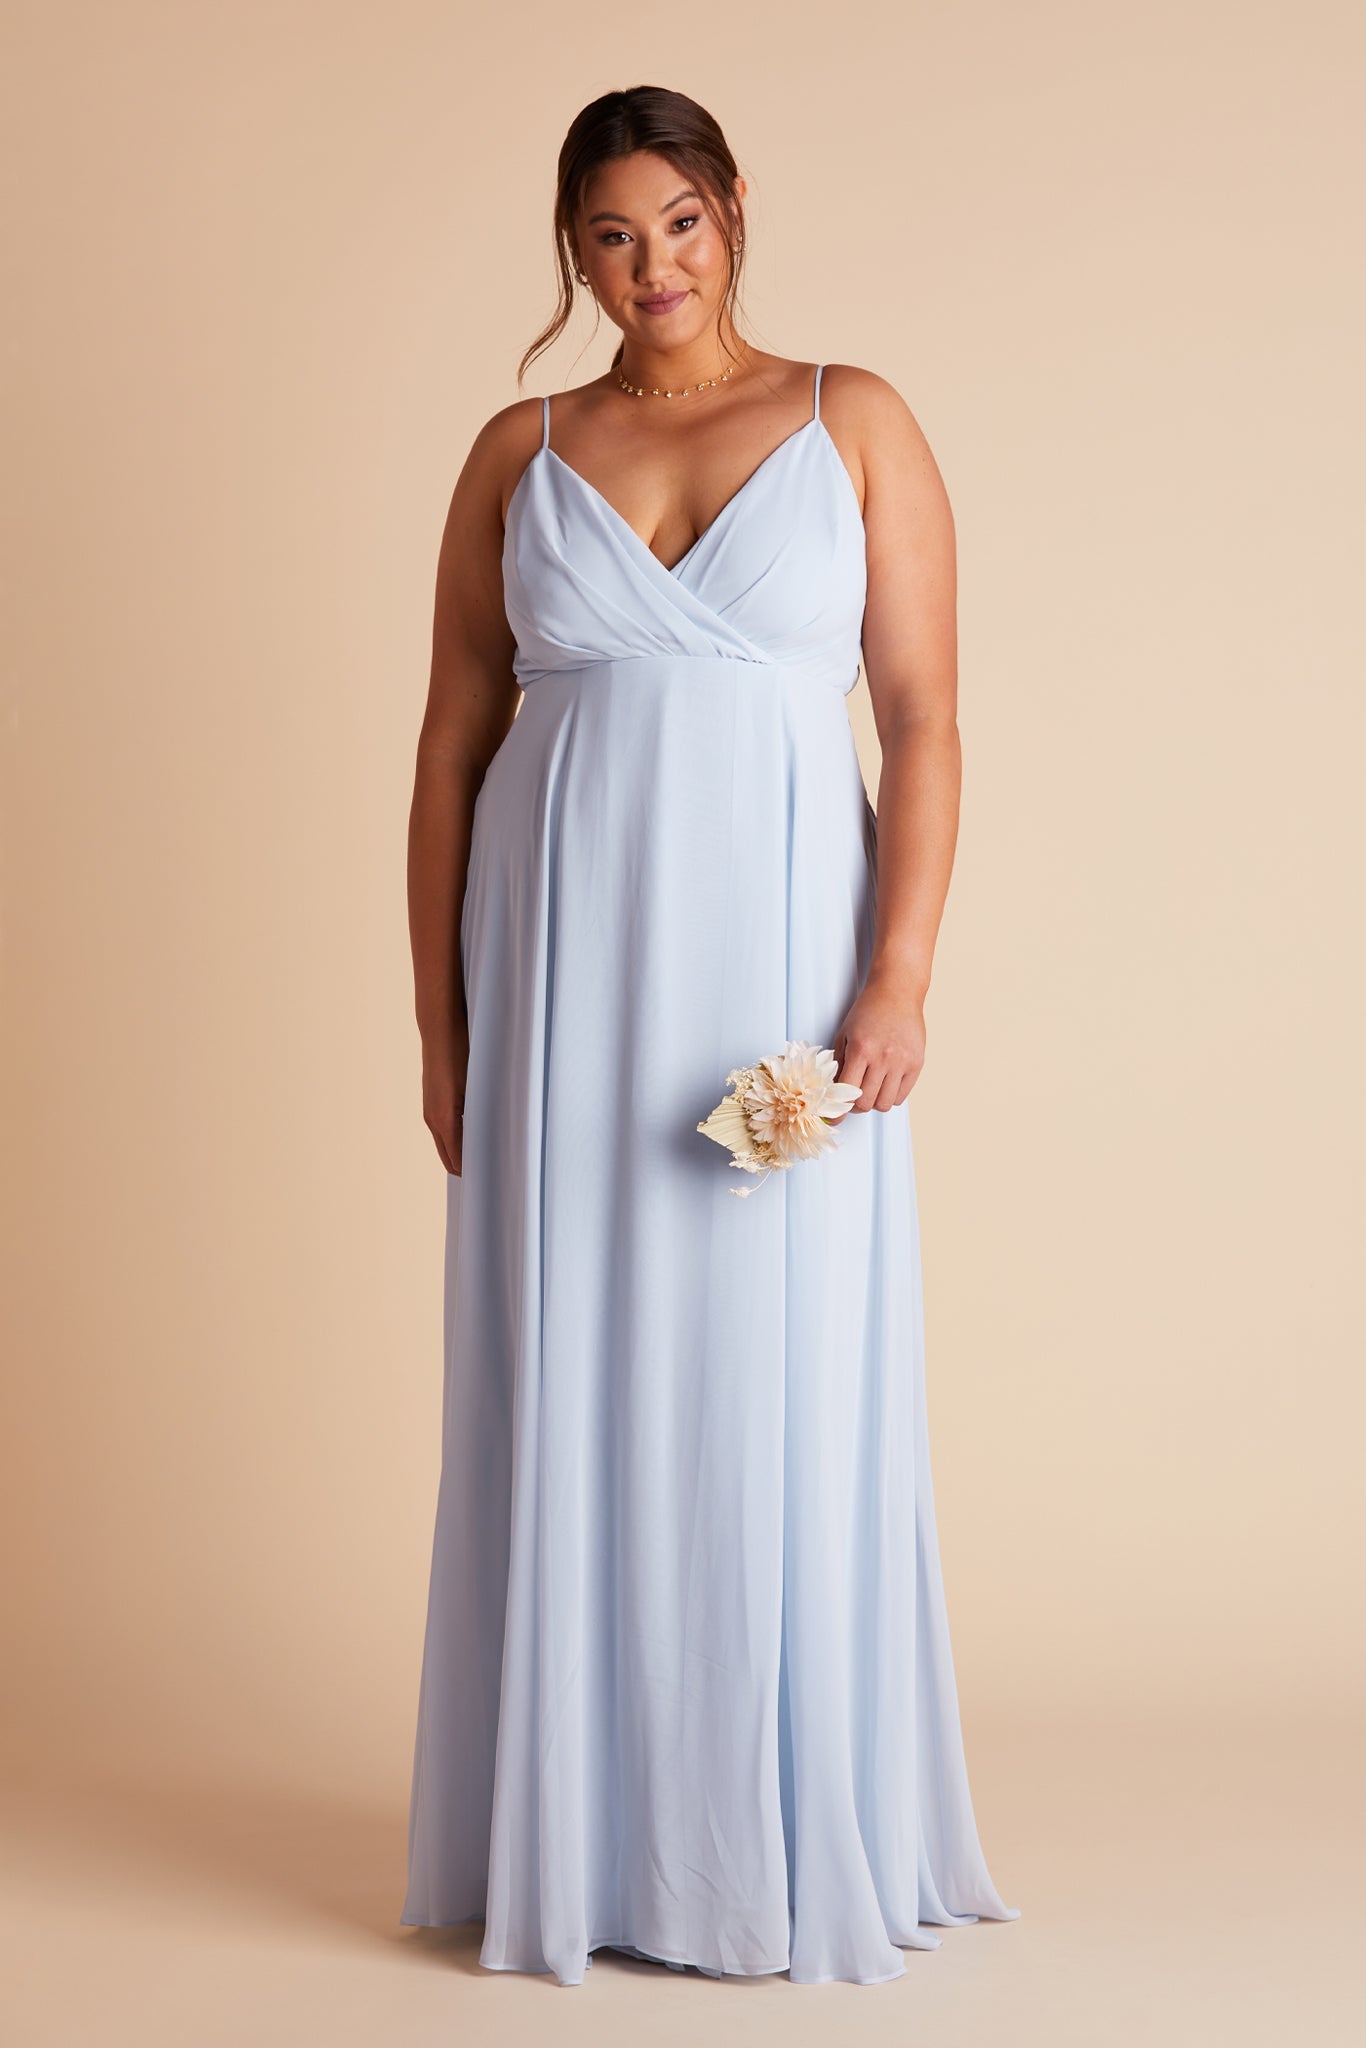 Kaia plus size bridesmaids dress in ice blue chiffon by Birdy Grey, front view